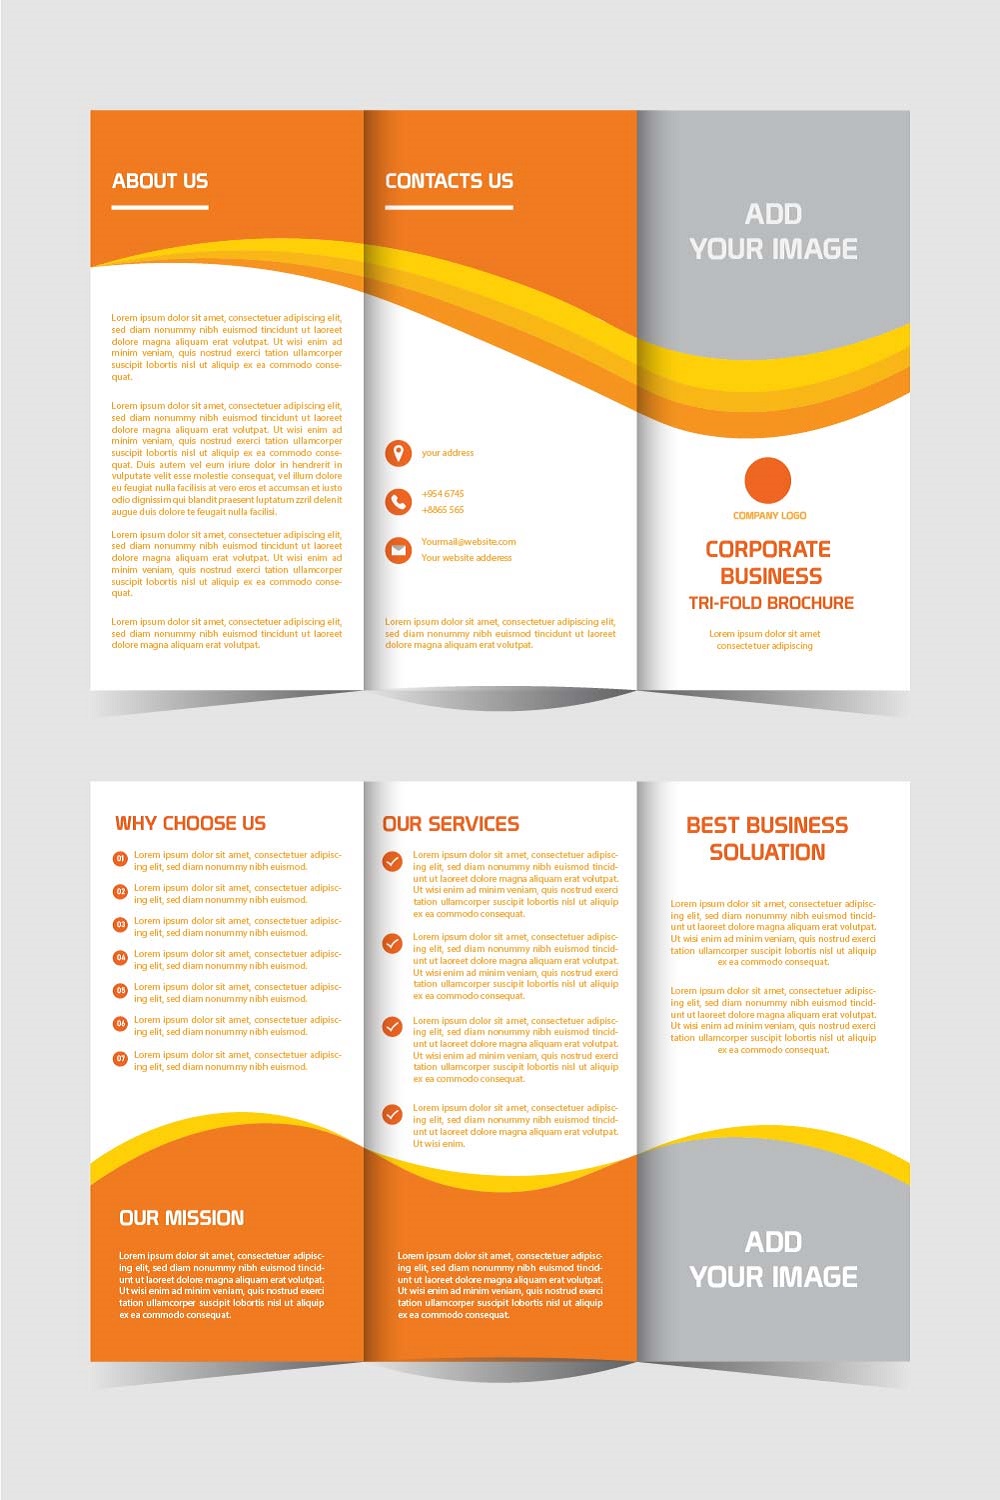 Corporate business trifold brochure design set editable and resizable pinterest preview image.